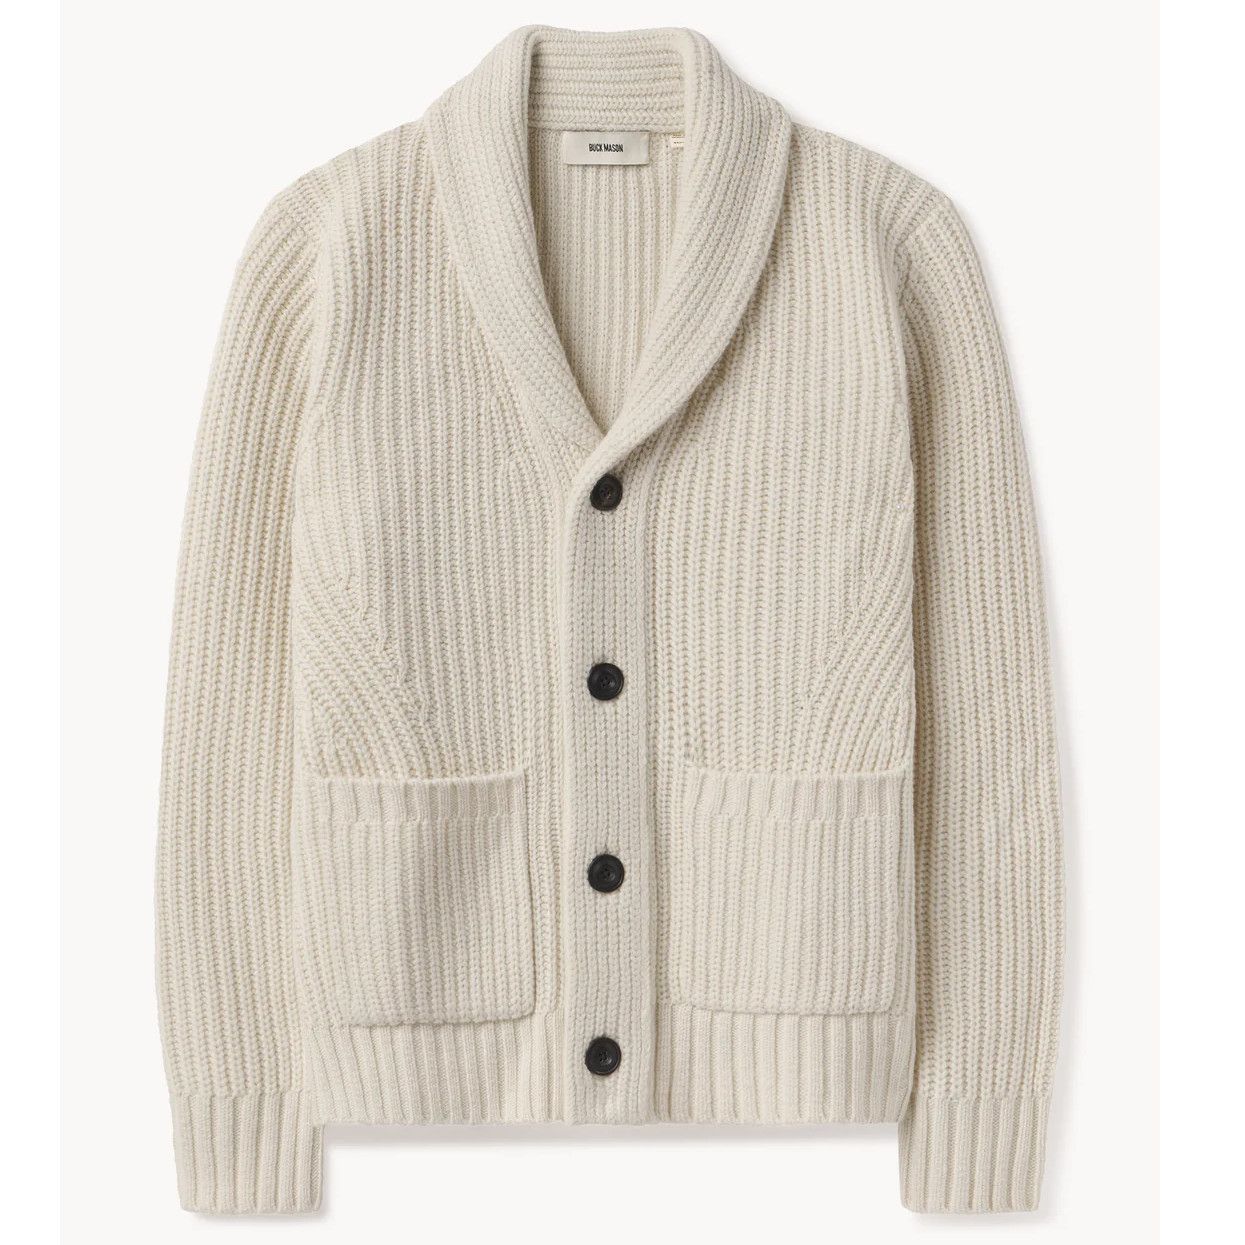 Once You Wear These Cardigans, You May Leave Blazers Behind Forever